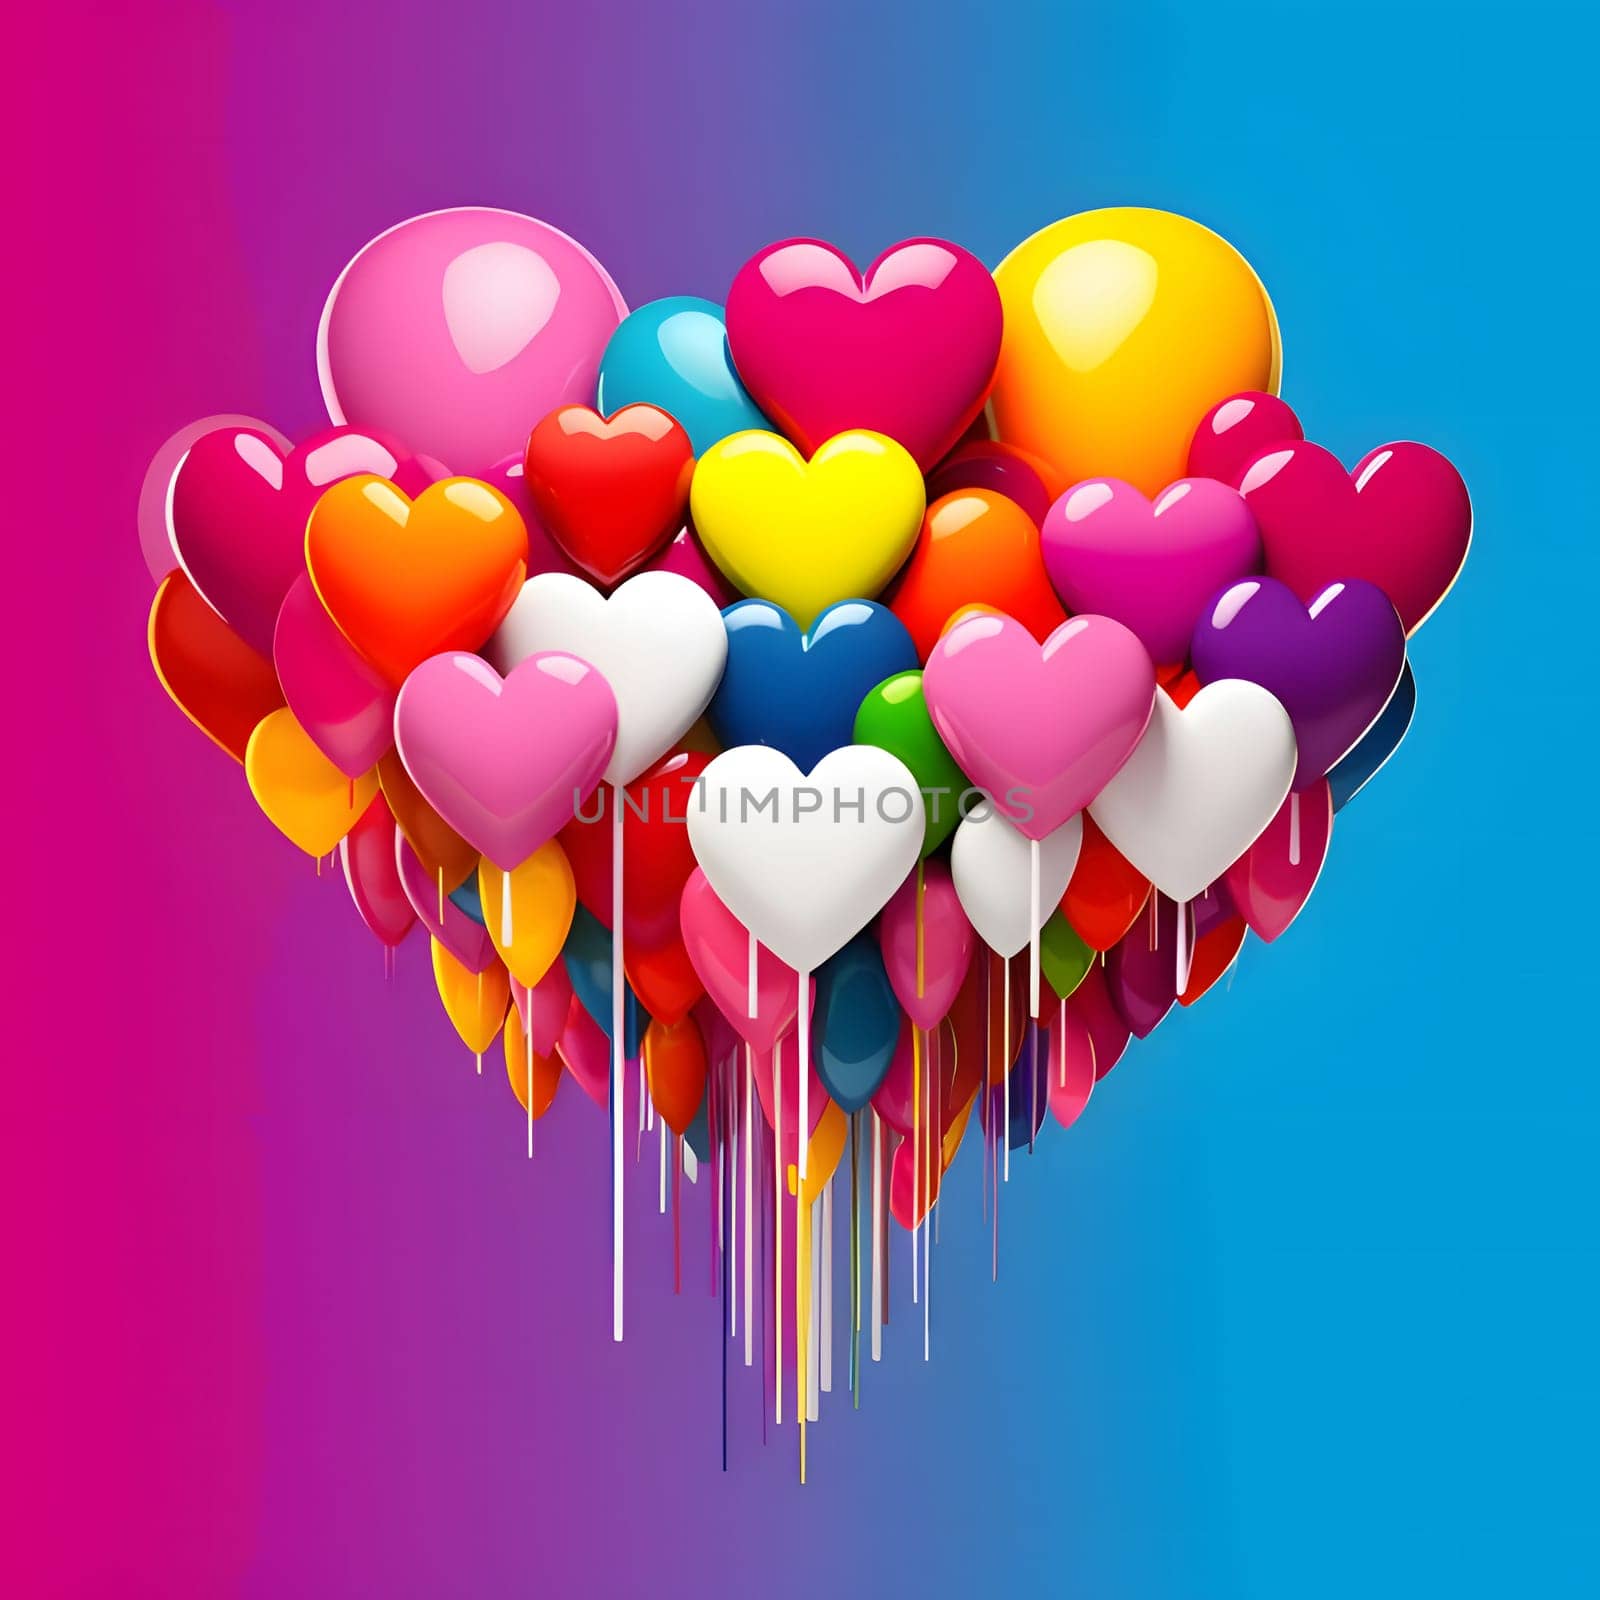 Rainbow colored heart-shaped balloons abstract composition. Heart as a symbol of affection and love. The time of falling in love and love.